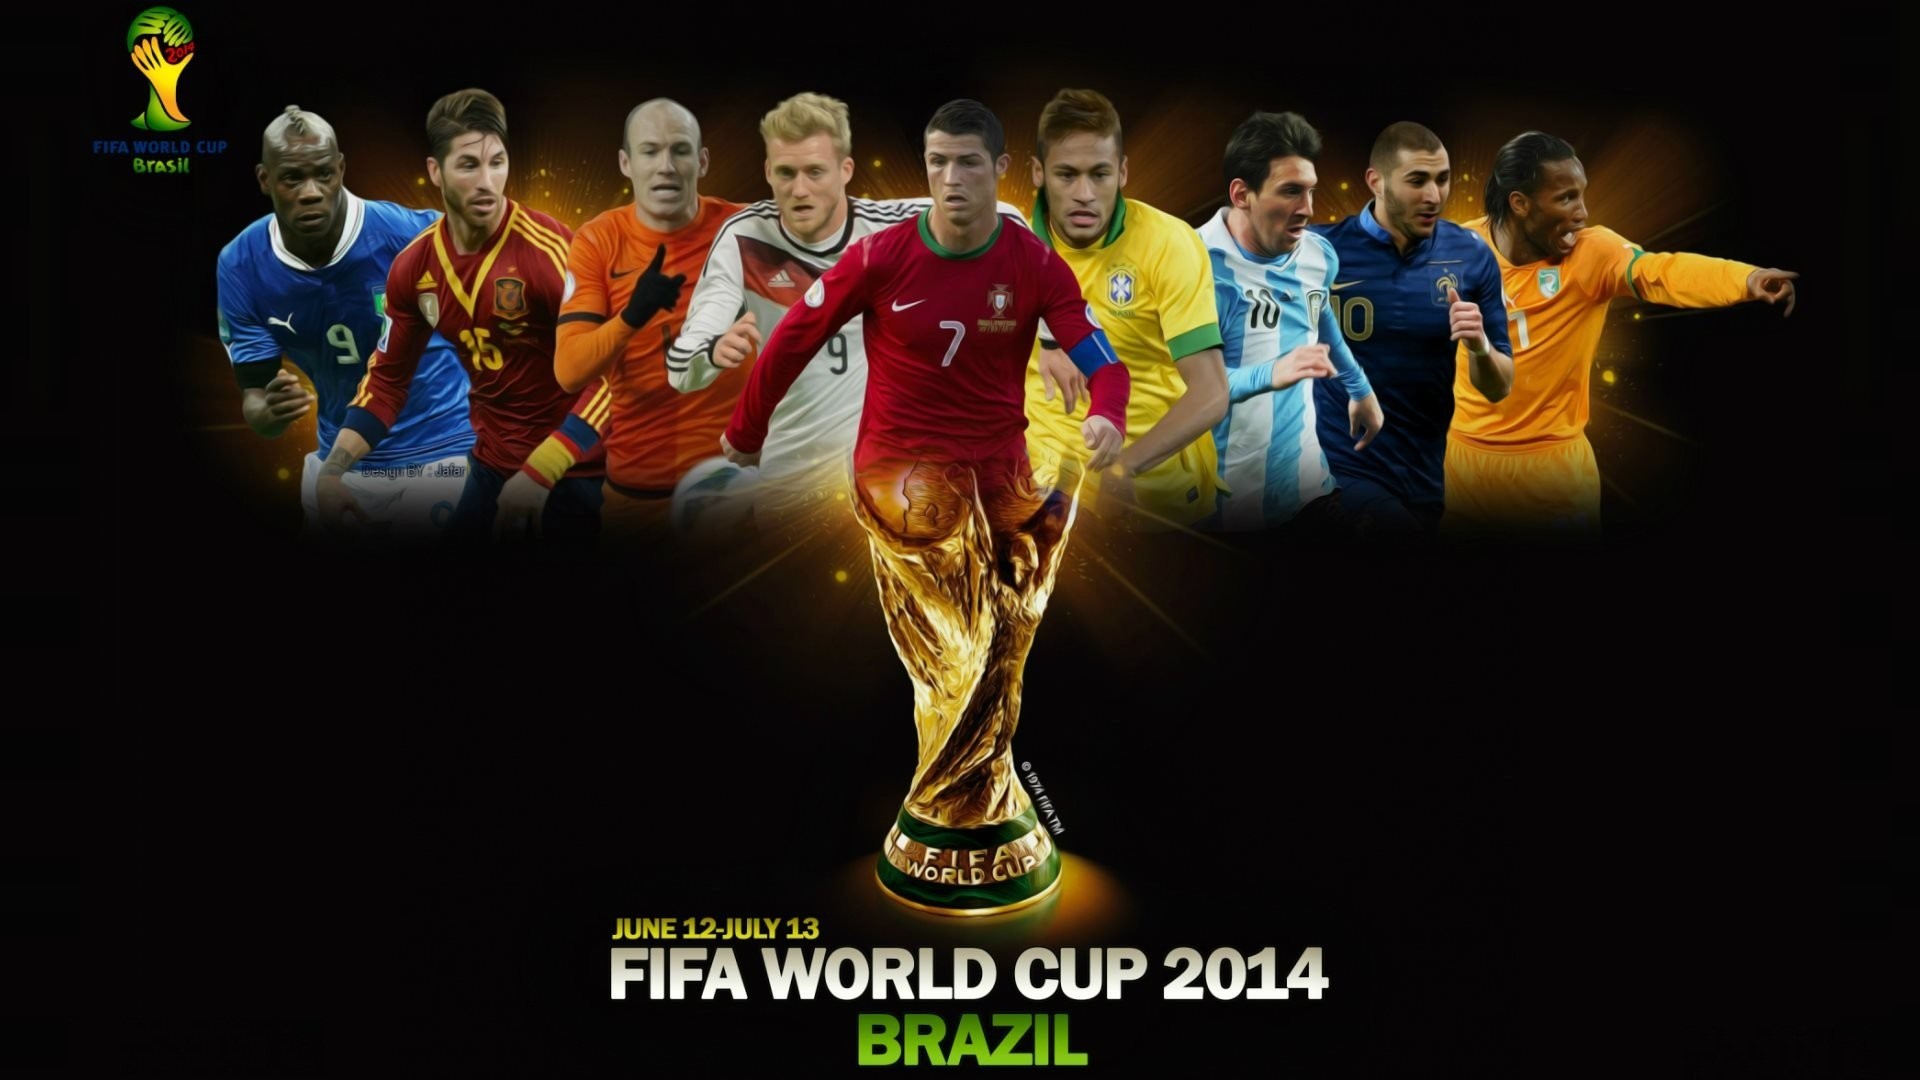 1920x1080 FIFA World Cup Trophy, Team, Players Wallpaper.